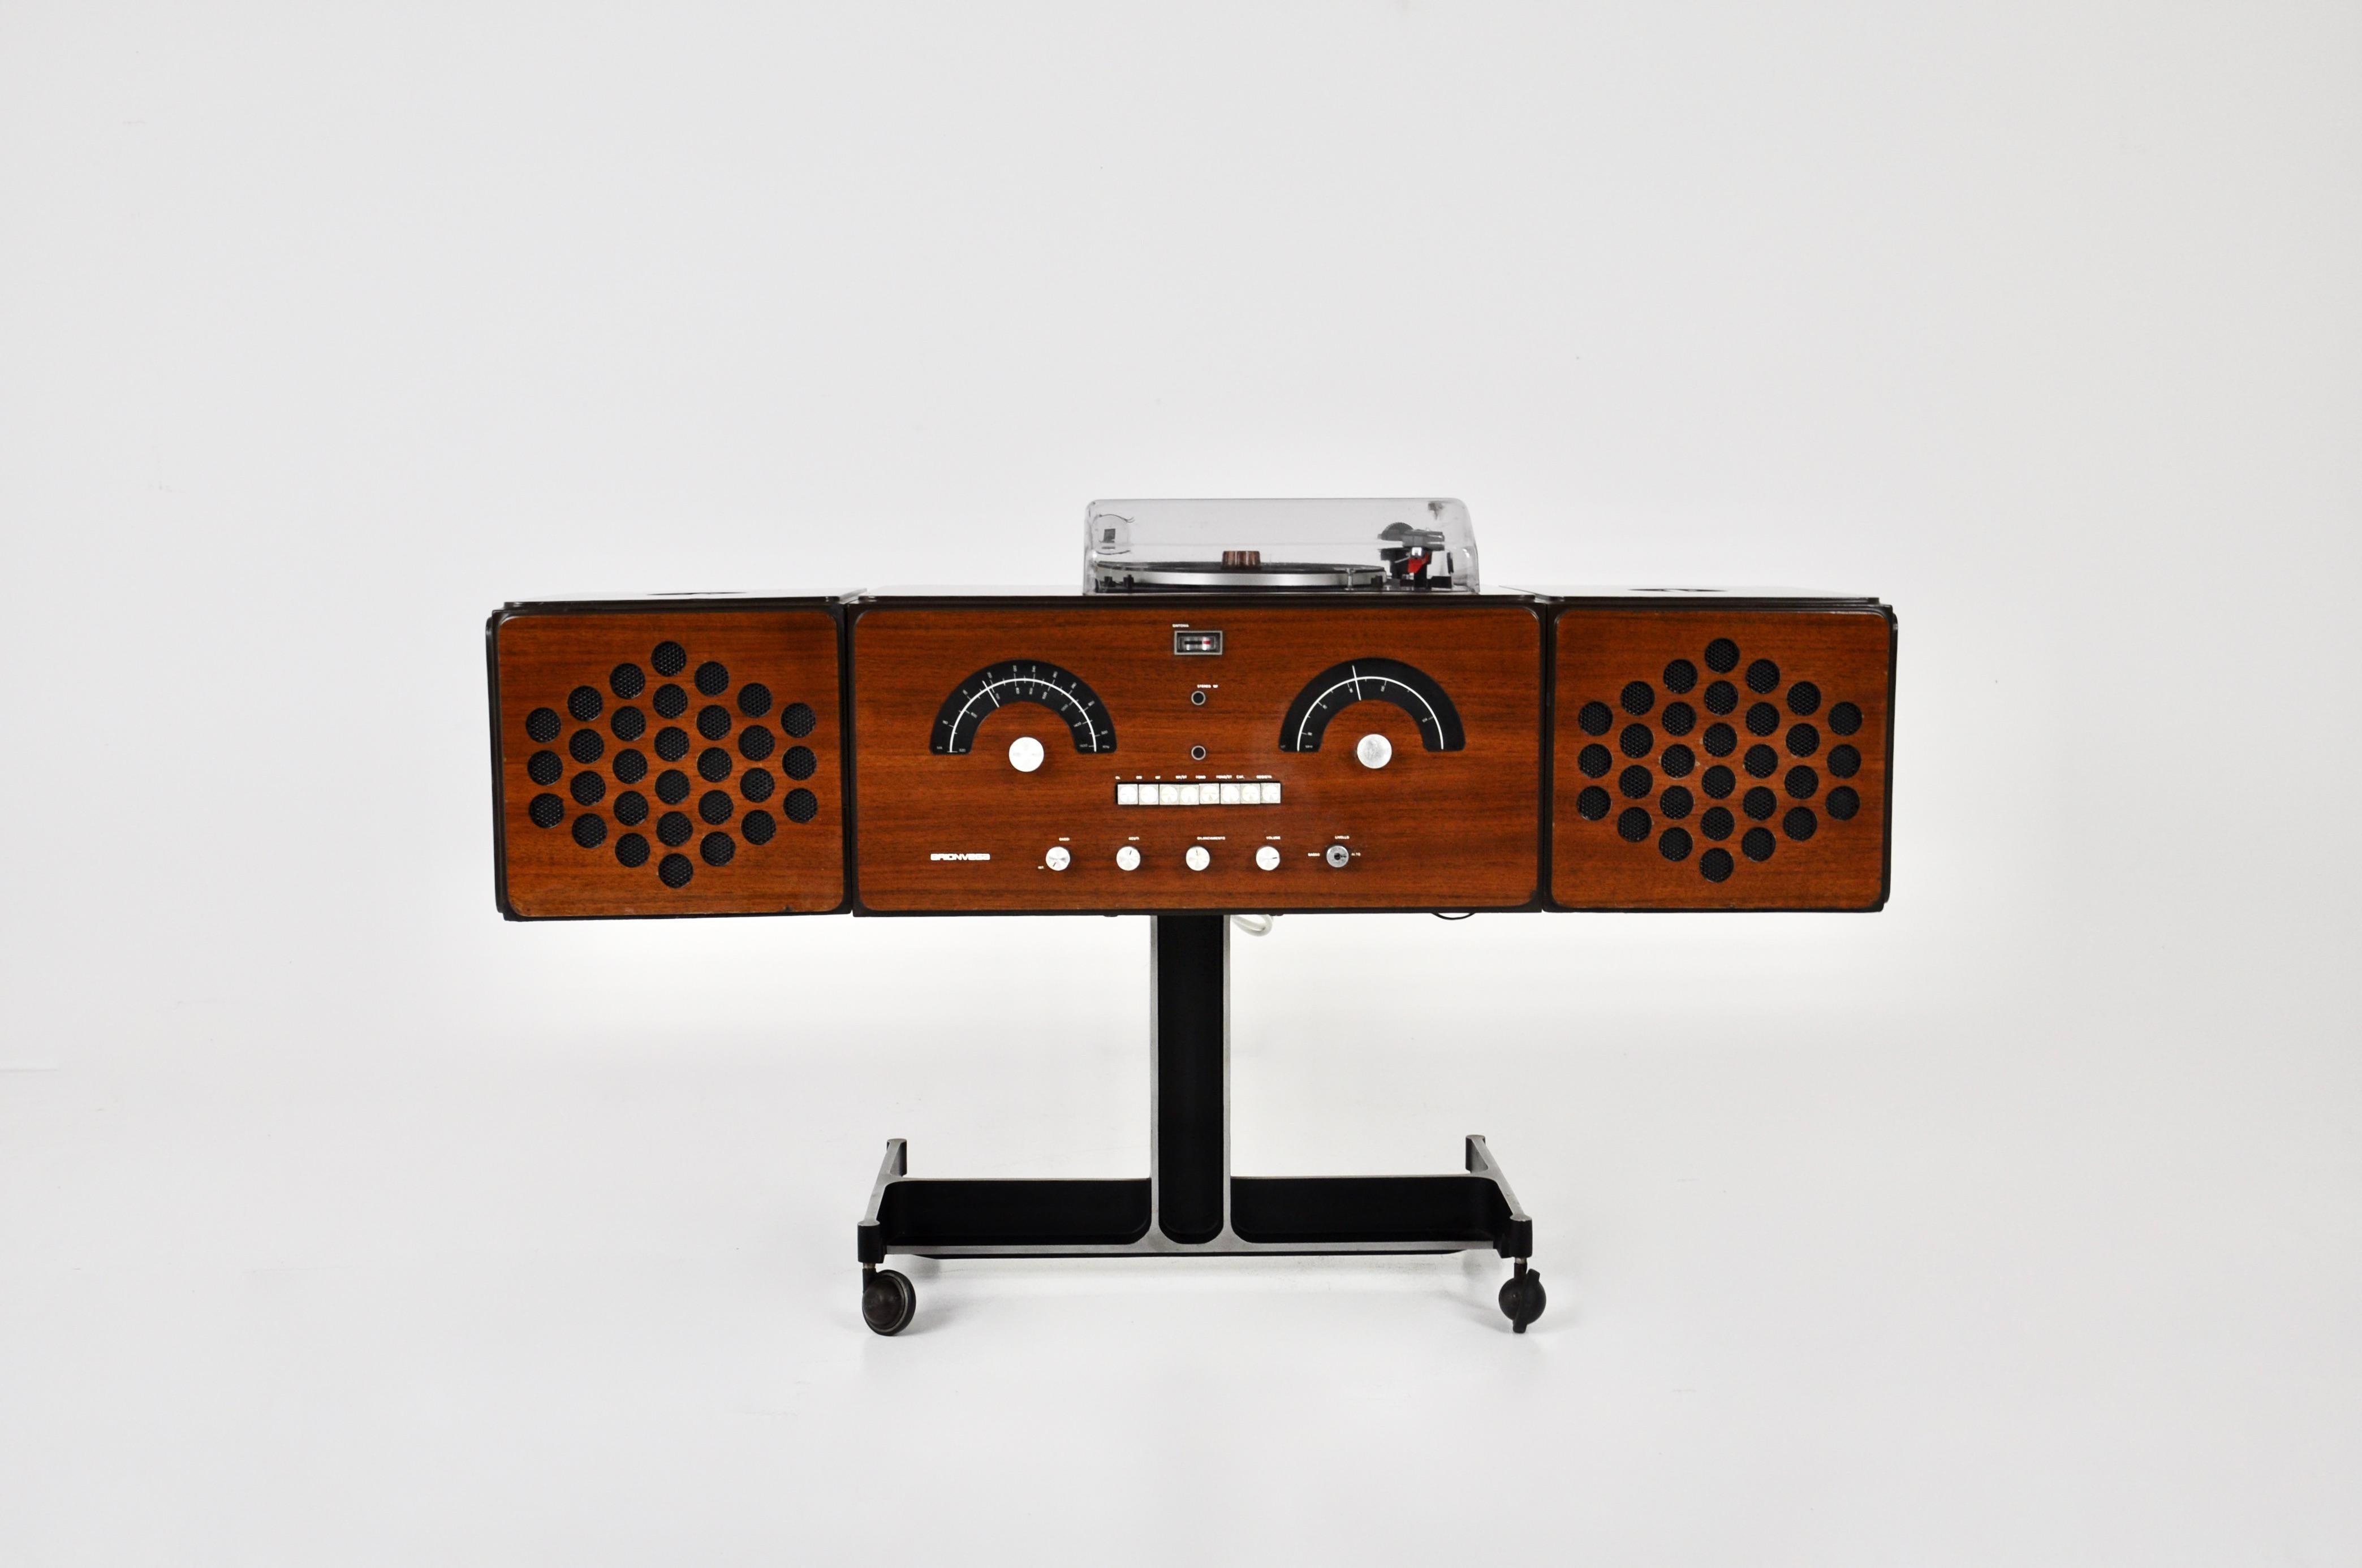 Brionvega wood-colored stereo radio. The radio and record player work perfectly, it has been completely overhauled. There is a bluethoot connection for GSM. Dimensions in closed position: height 92 cm, width 62 cm, depth 37 cm. Wear due to time and